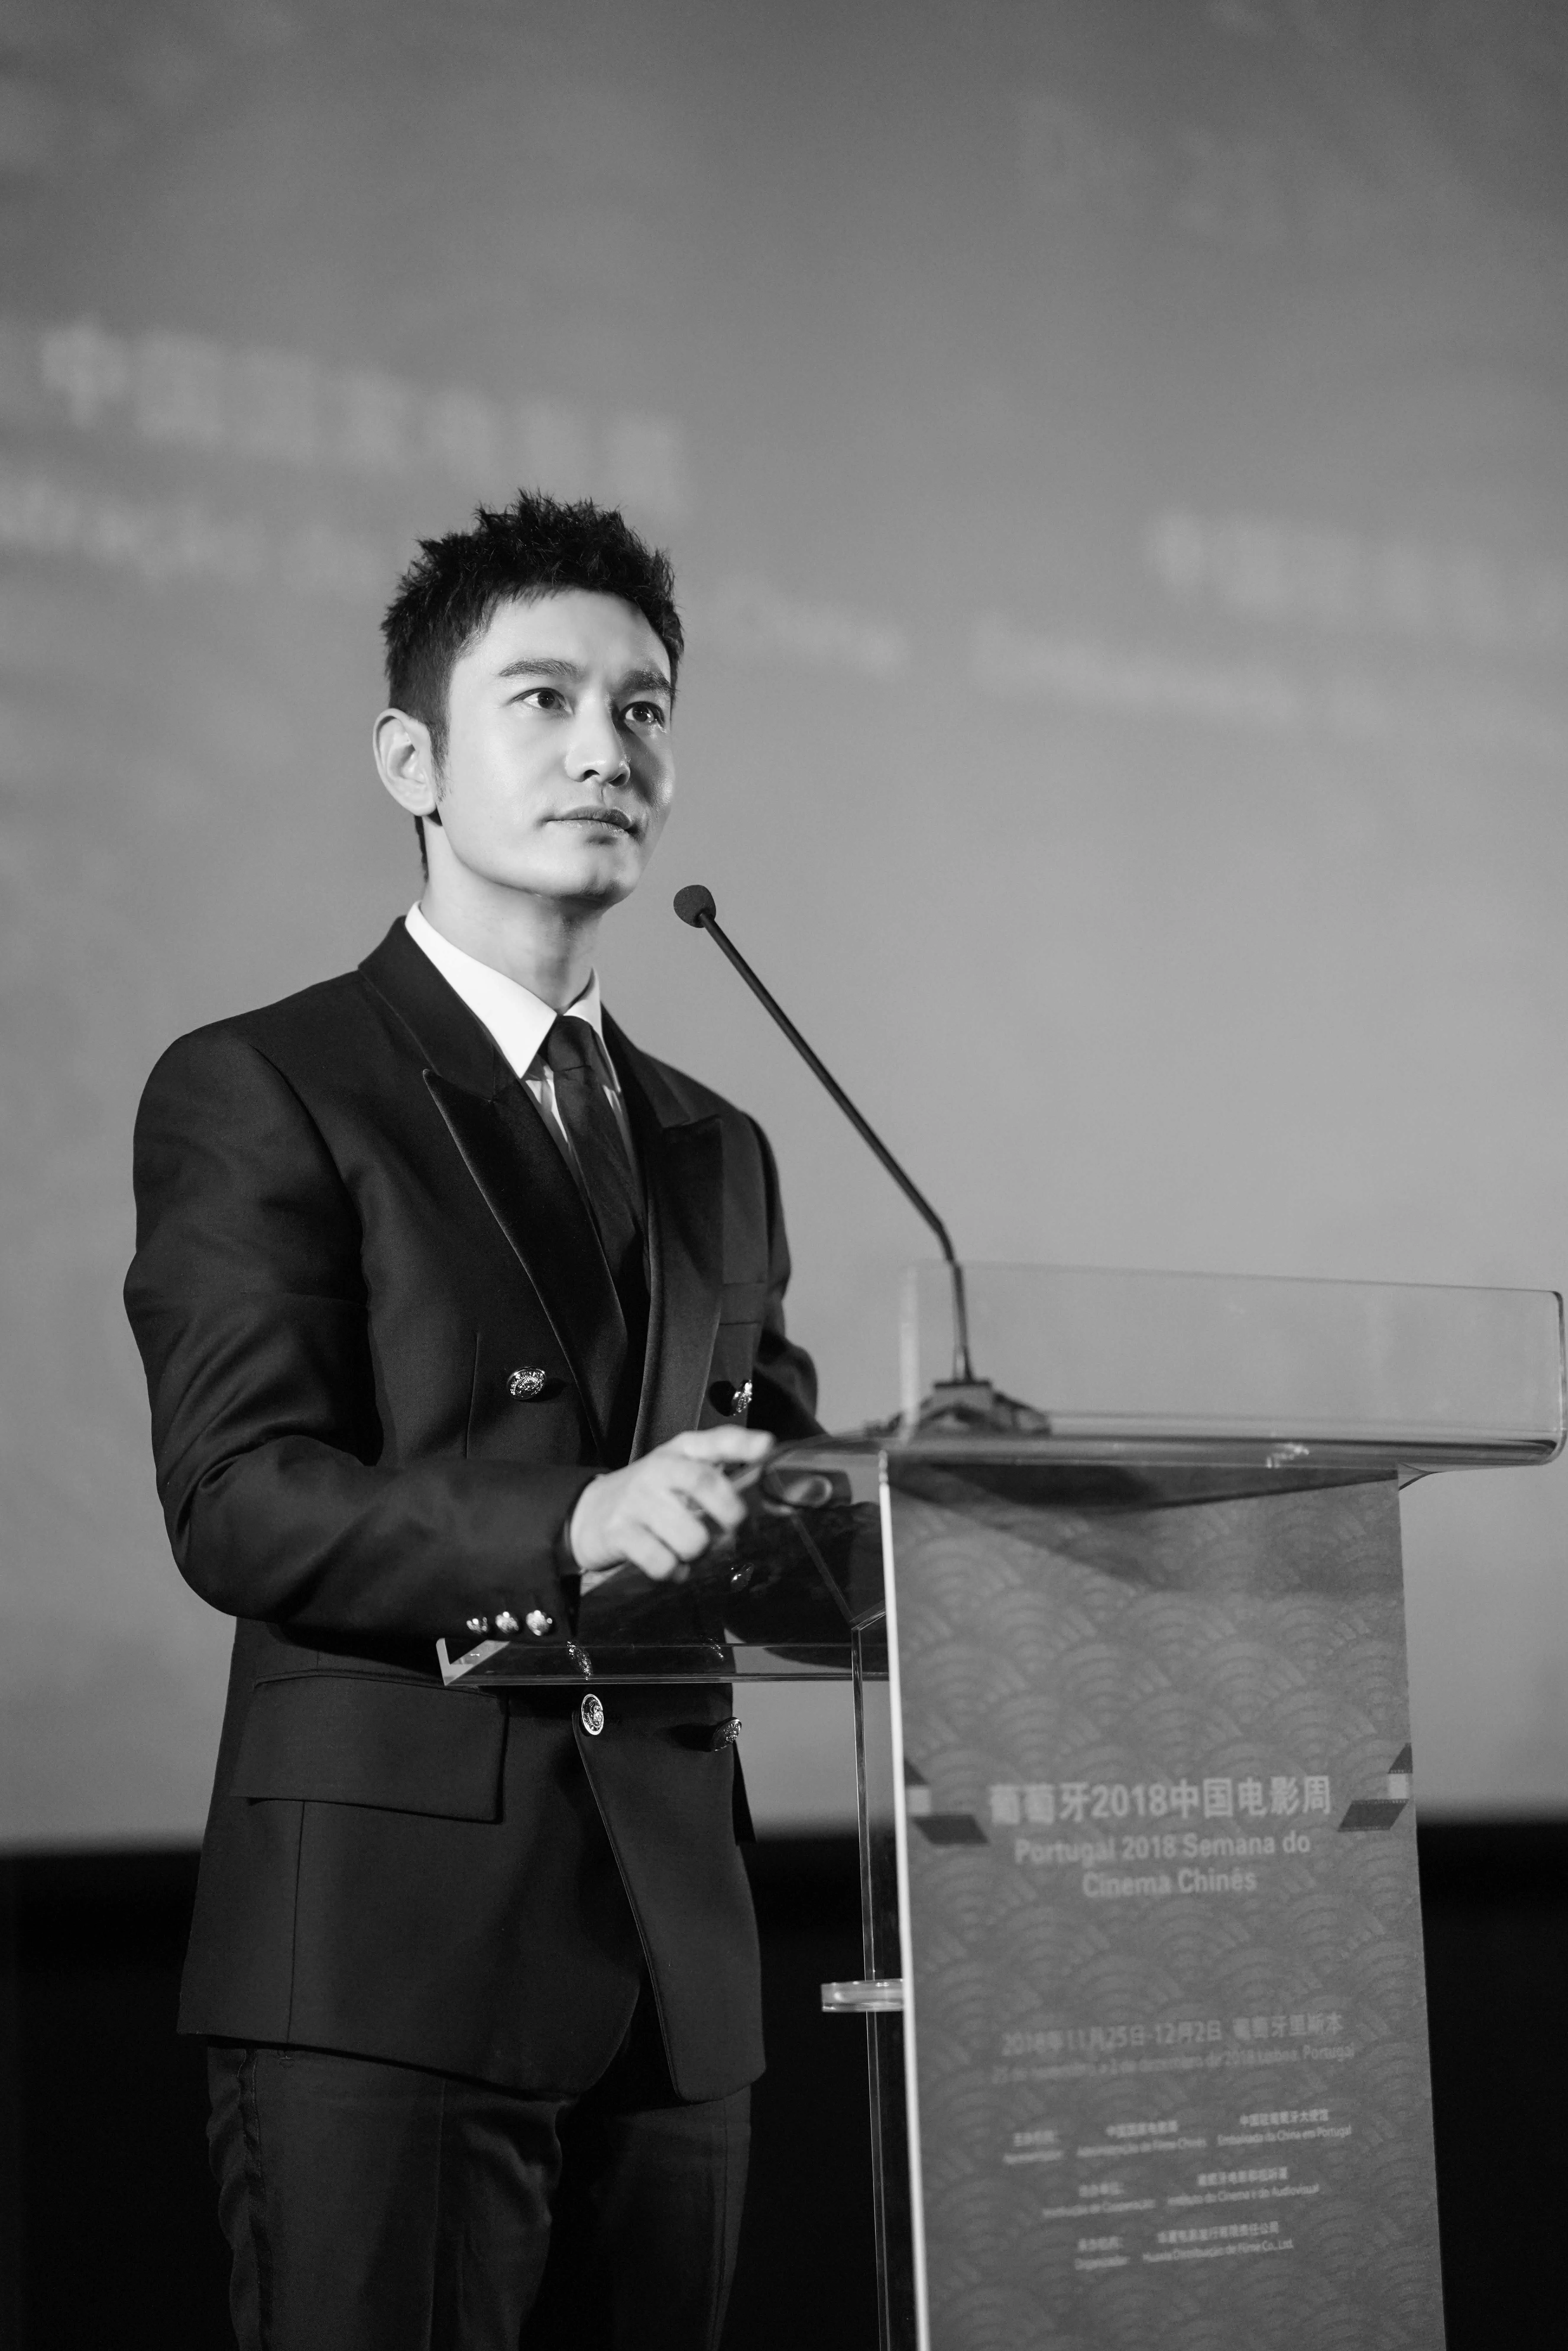 Opening of sino-portuguese film cultural exchange week - Xiaoming Huang spoke as the actor's representative